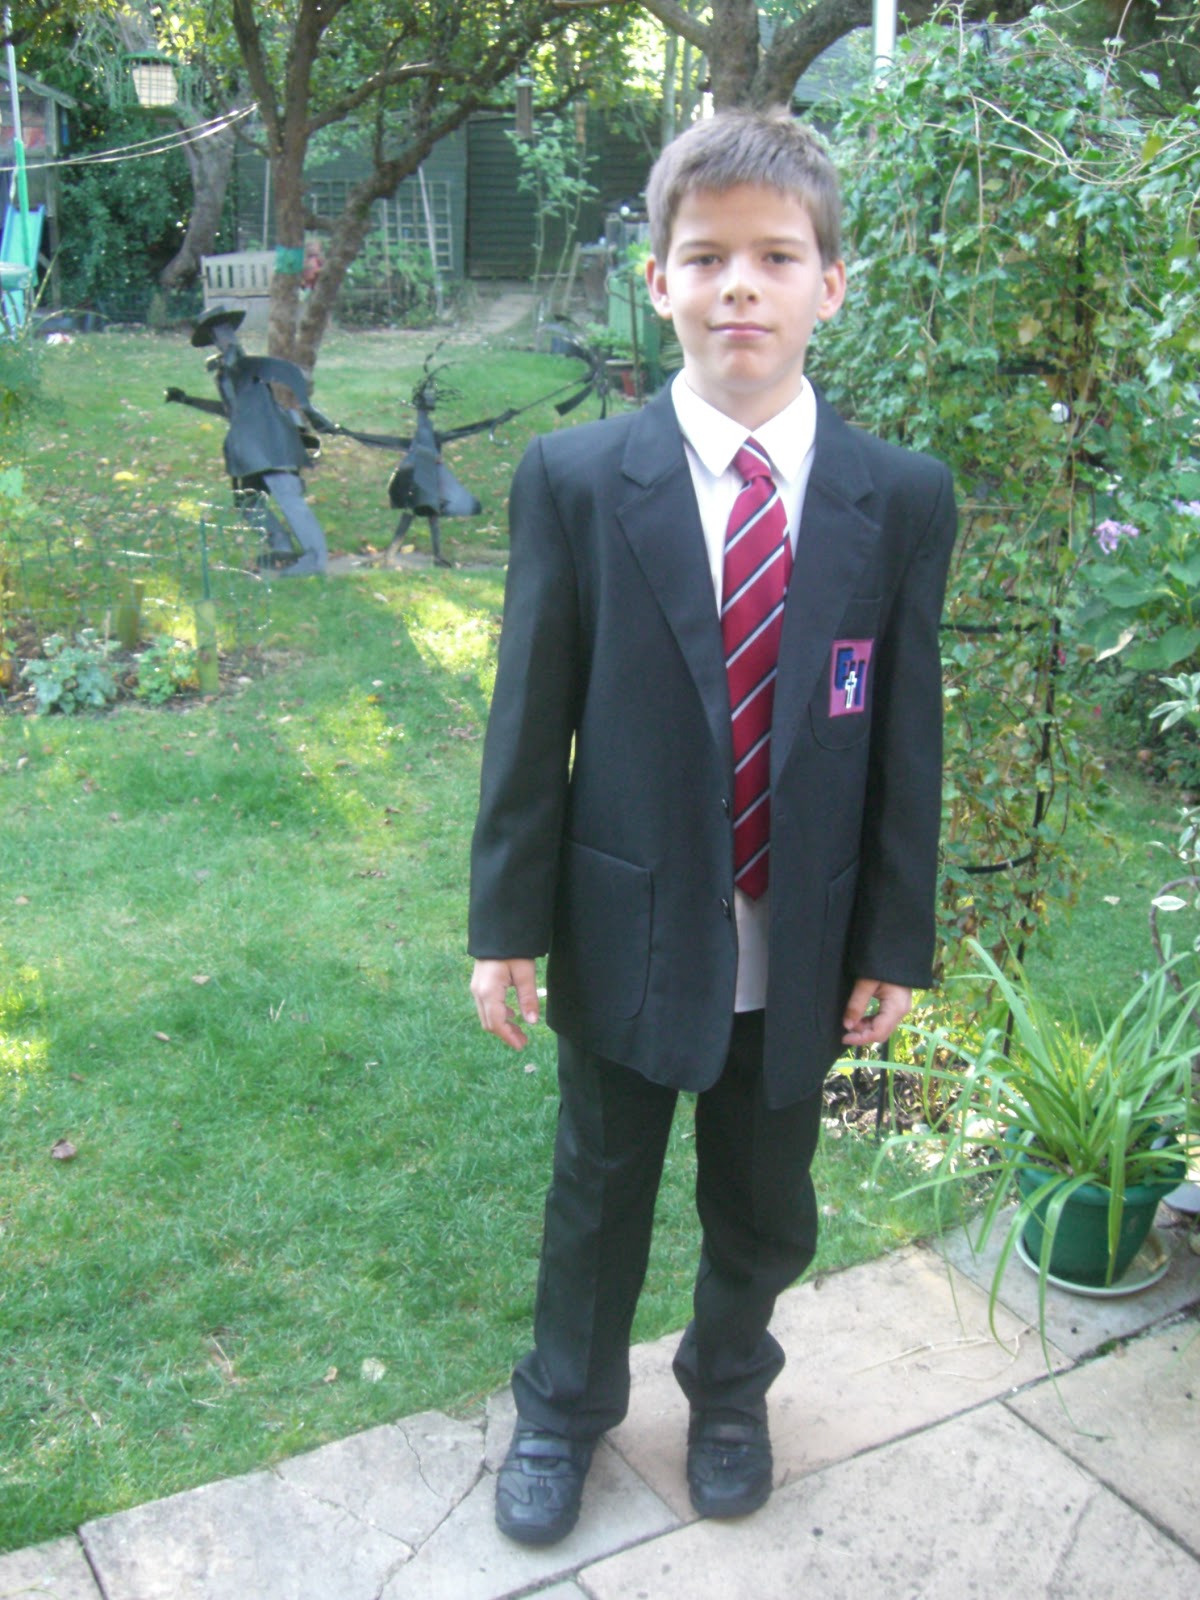 Steve Evans Blog: First Day at Secondary School